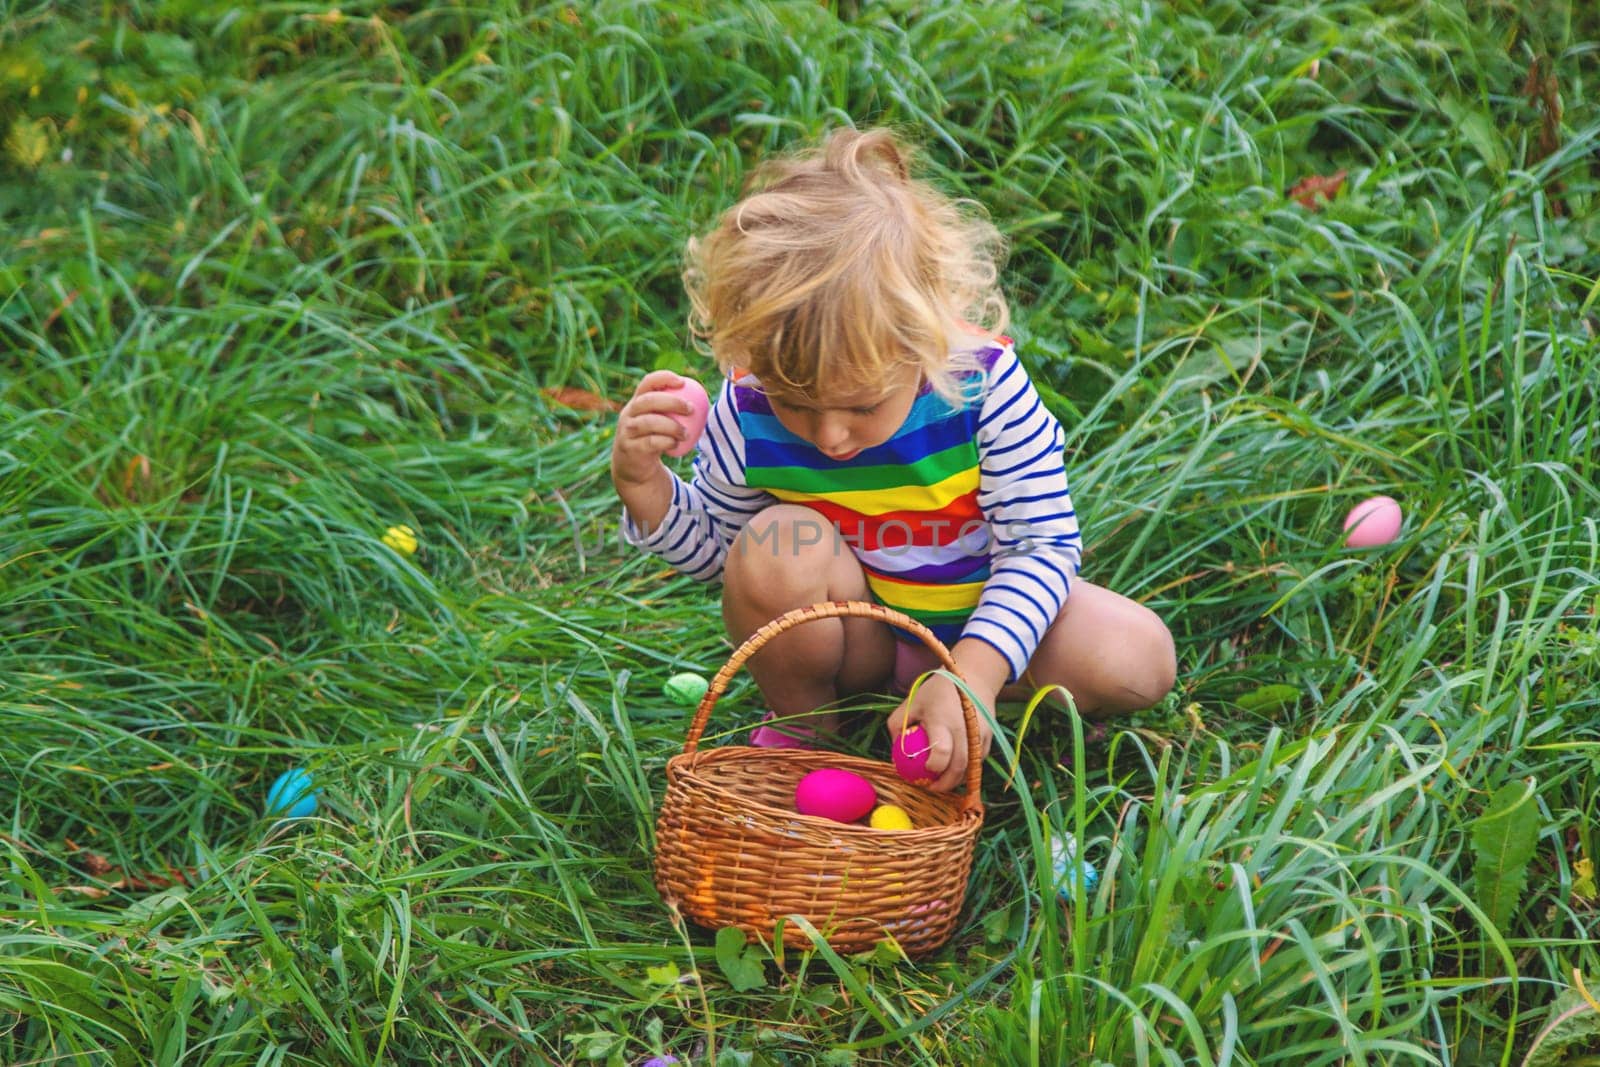 A child collects Easter eggs in the grass. Selective focus. Kid.